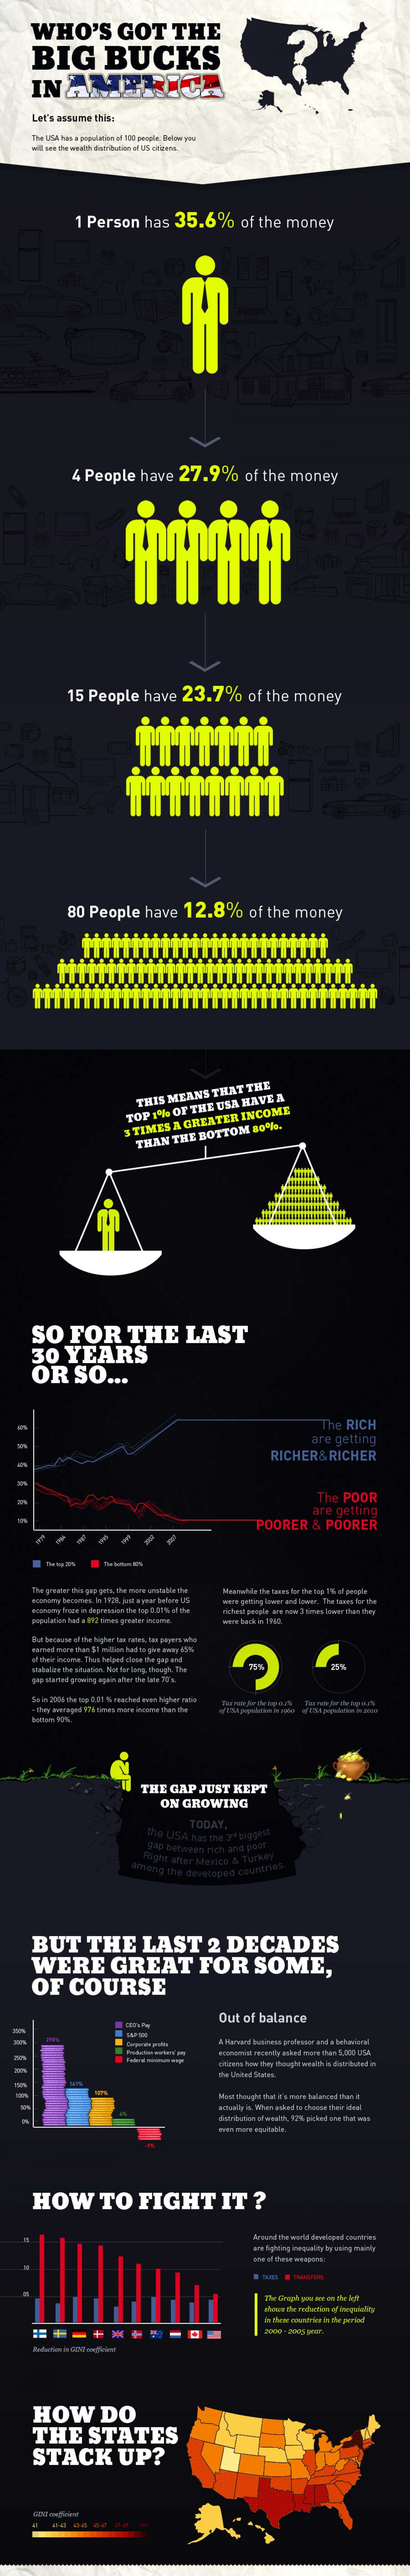 Wealth and Inequality in the United States Infographic